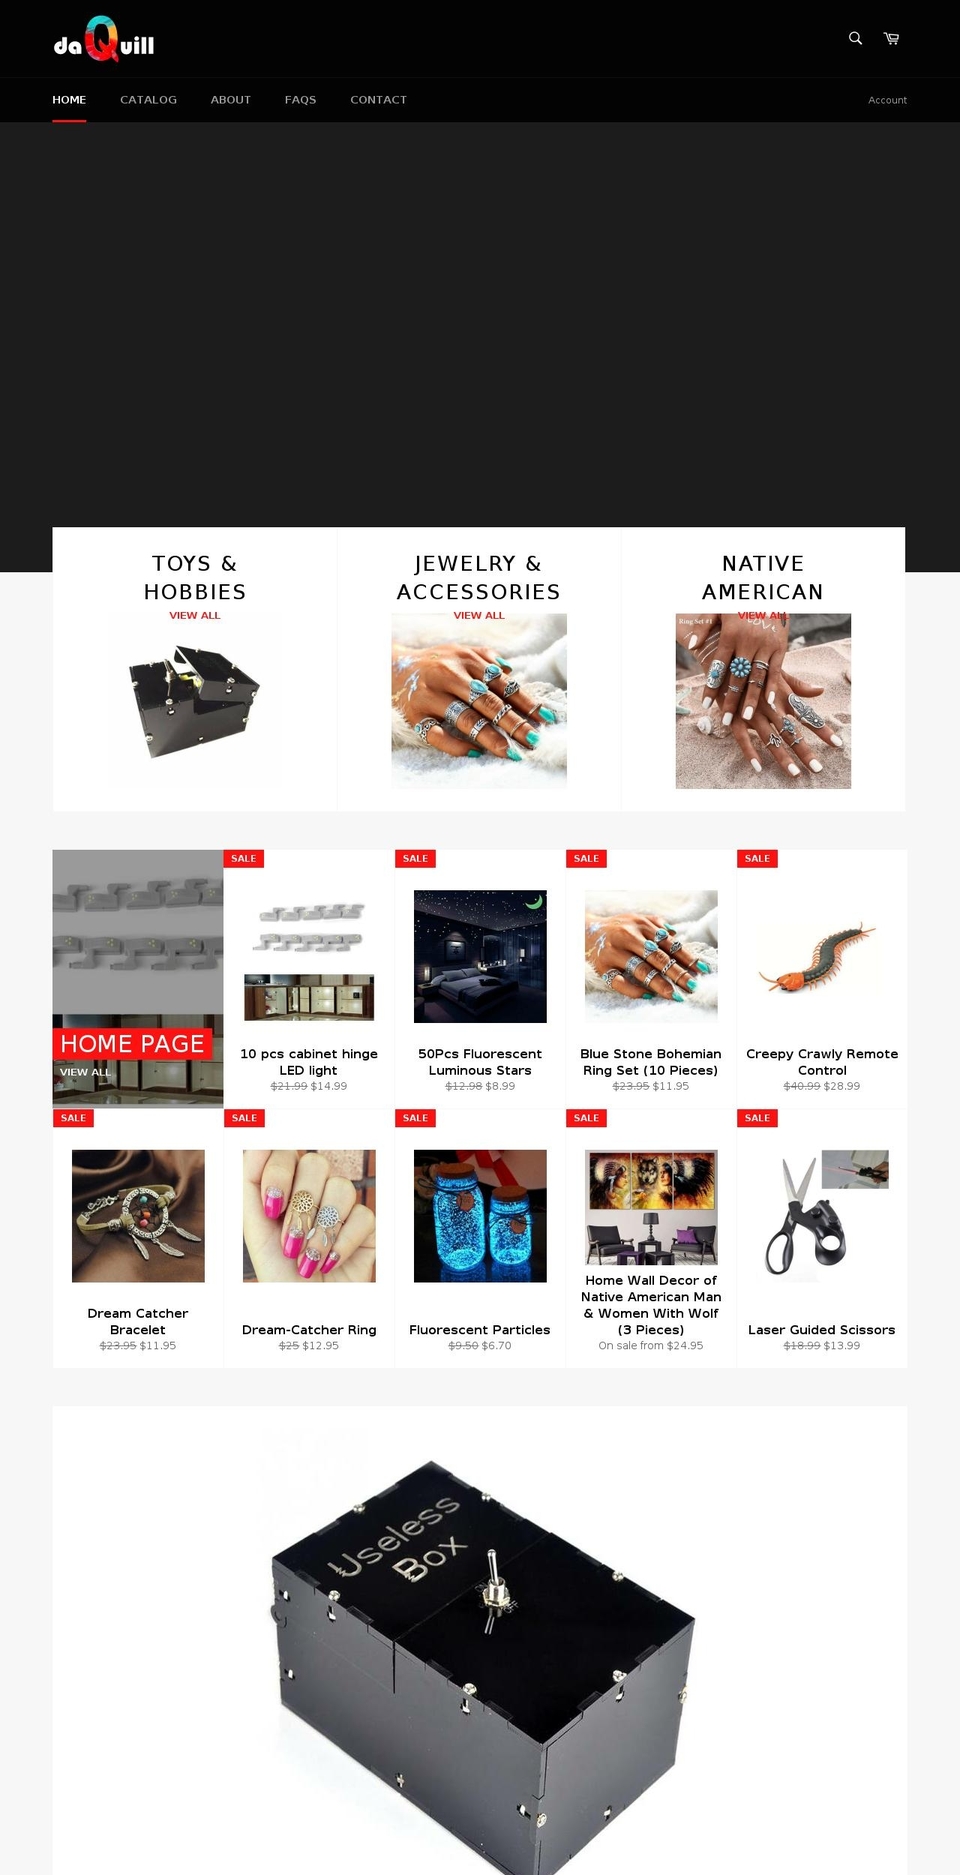 Copy of venture Shopify theme site example daquill.com